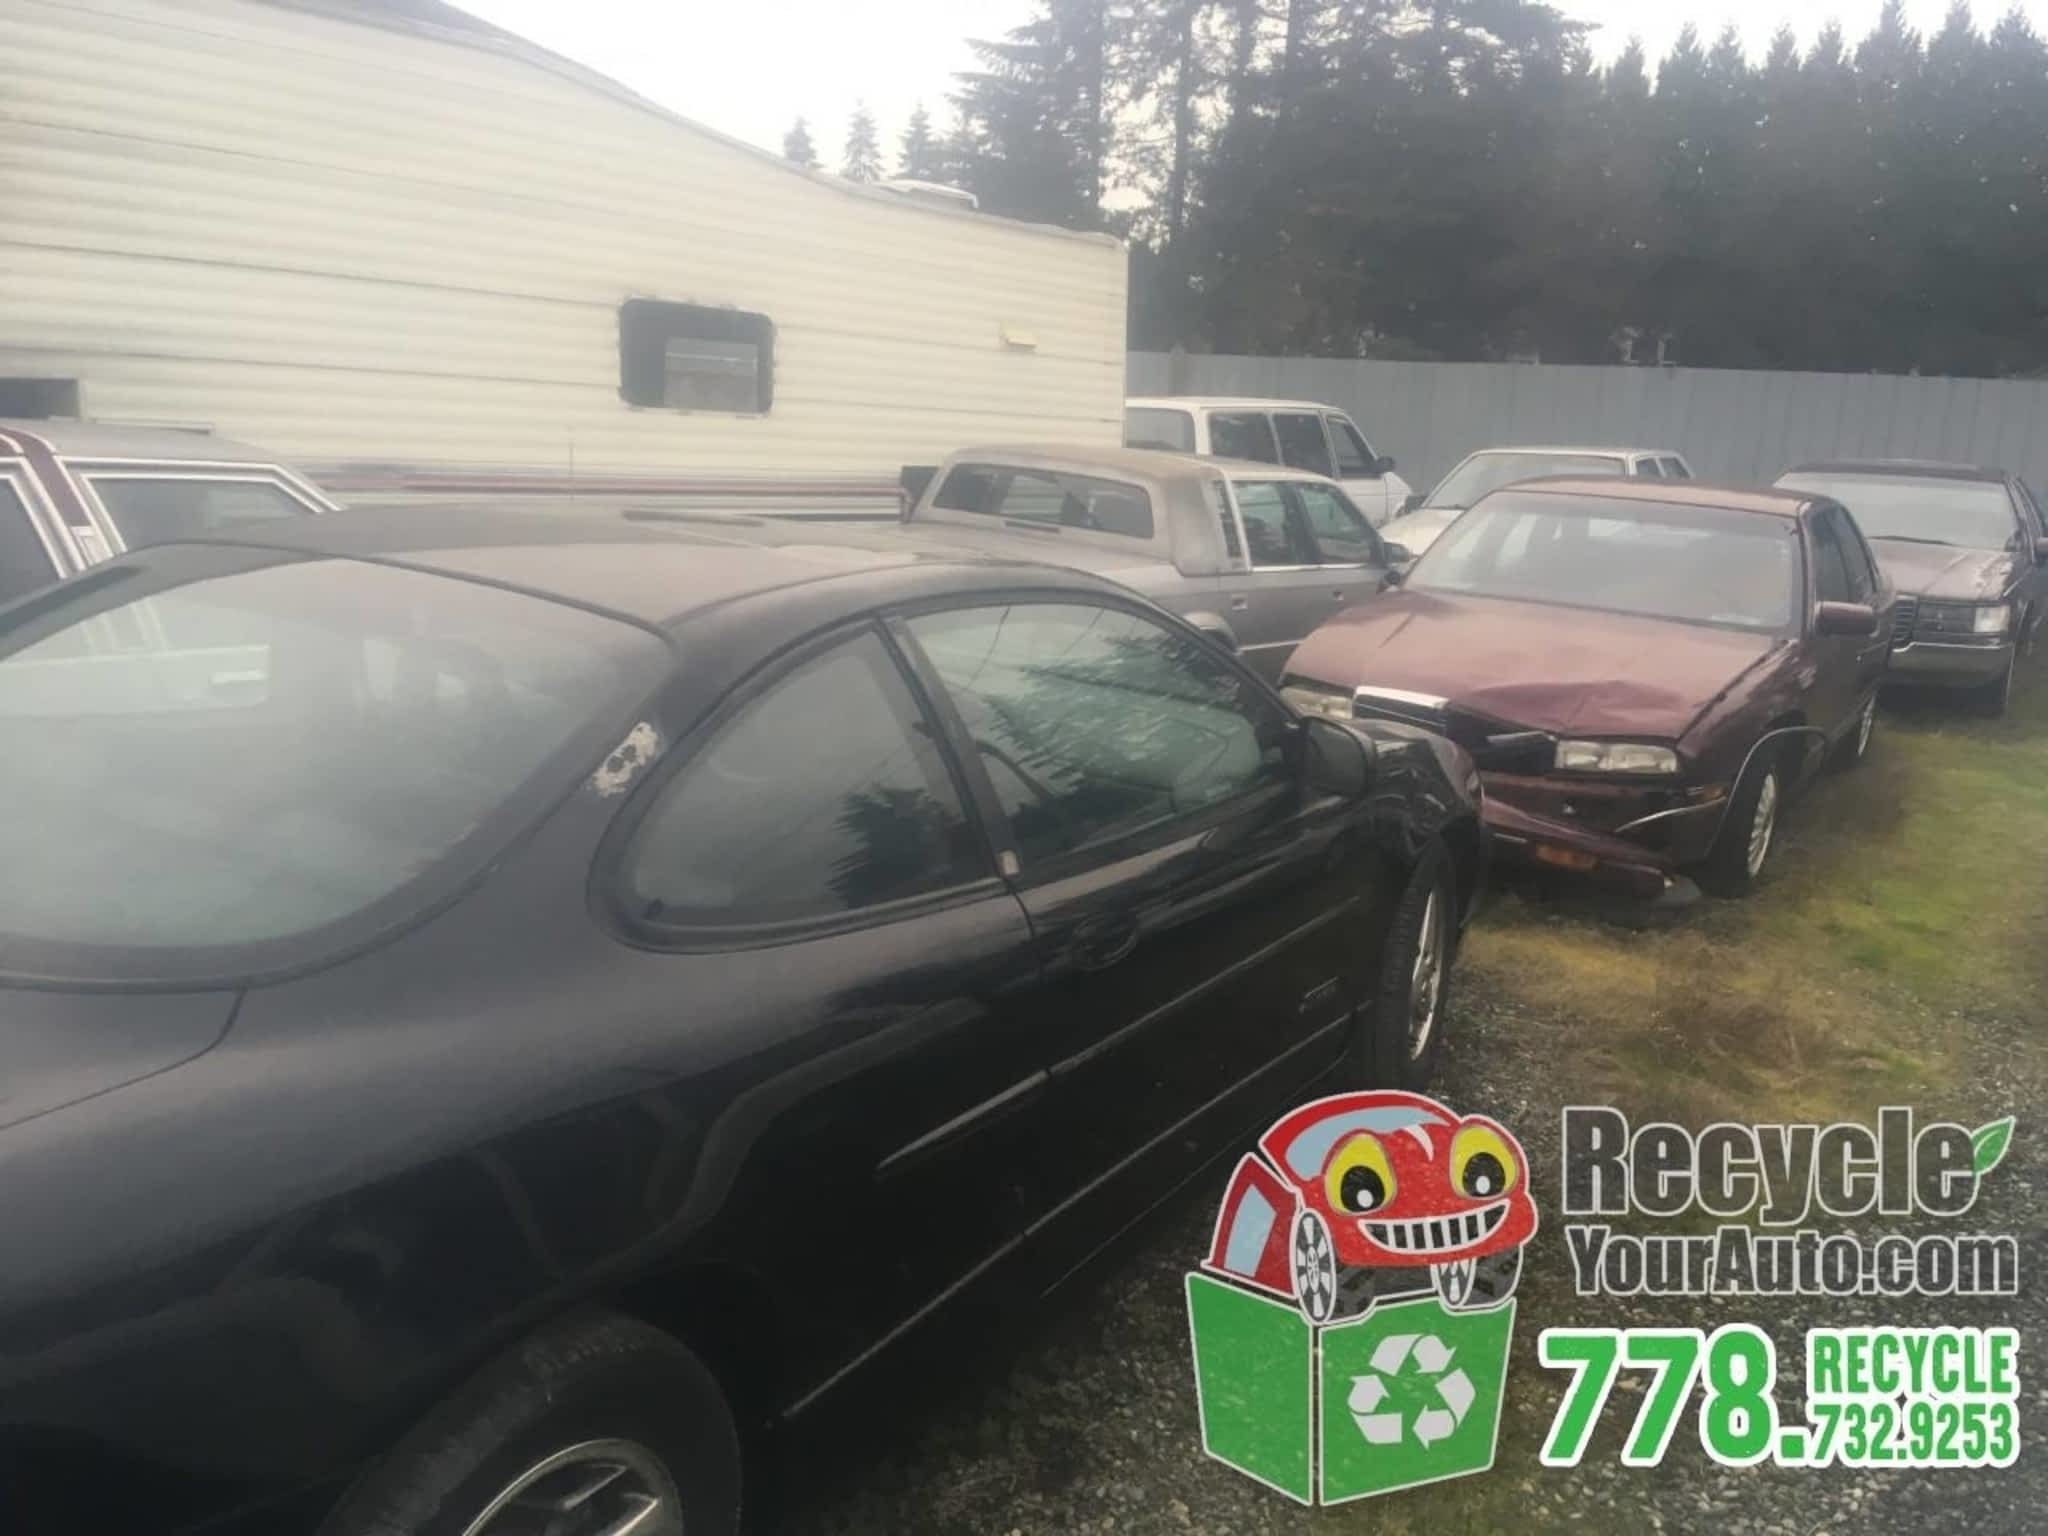 photo Recycle Your Auto Towing and Scrap Car Removal